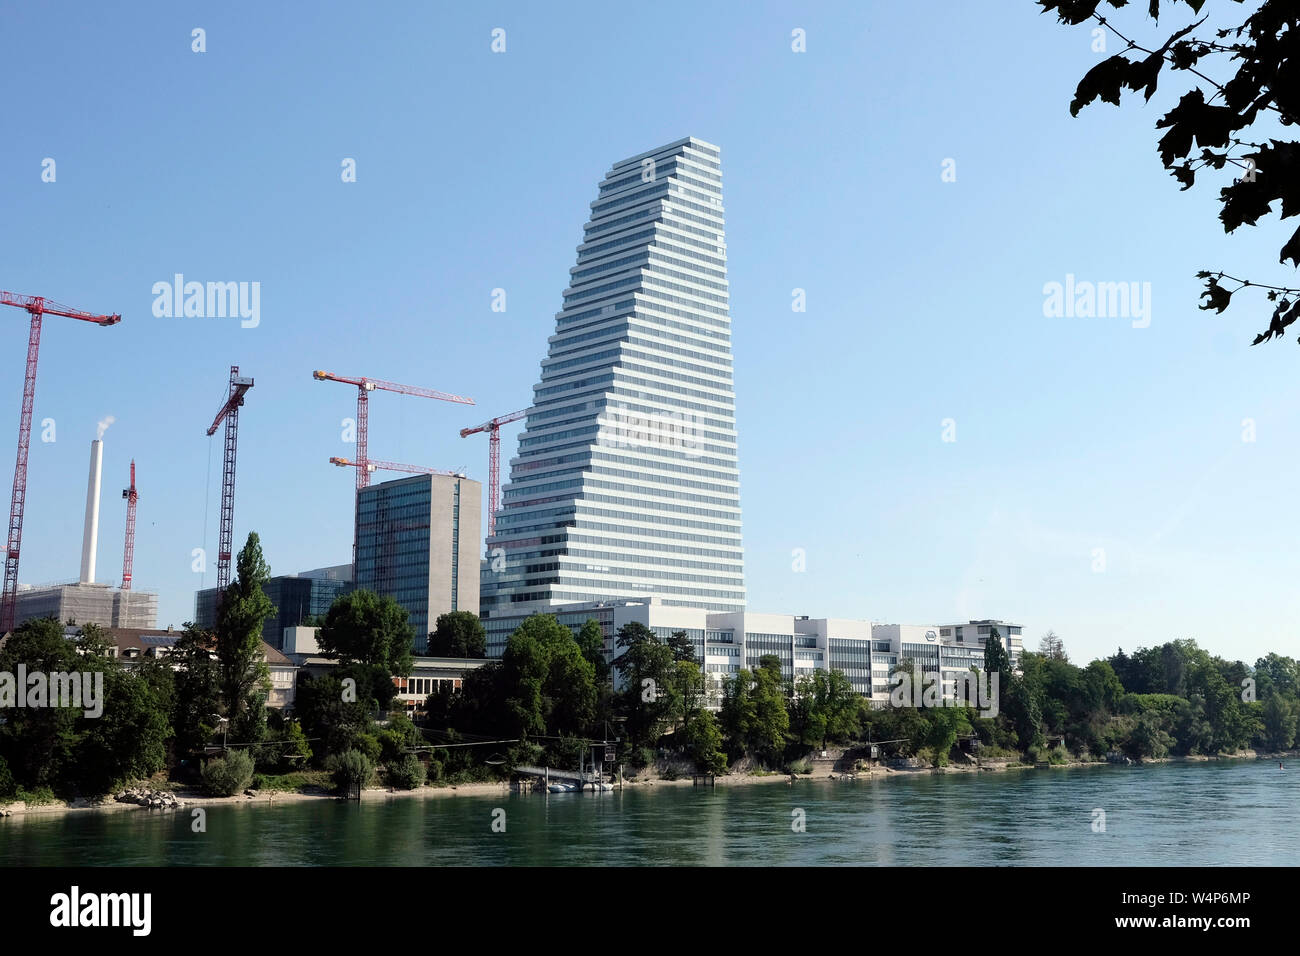 Tallest Building In Switzerland High Resolution Stock Photography and  Images - Alamy